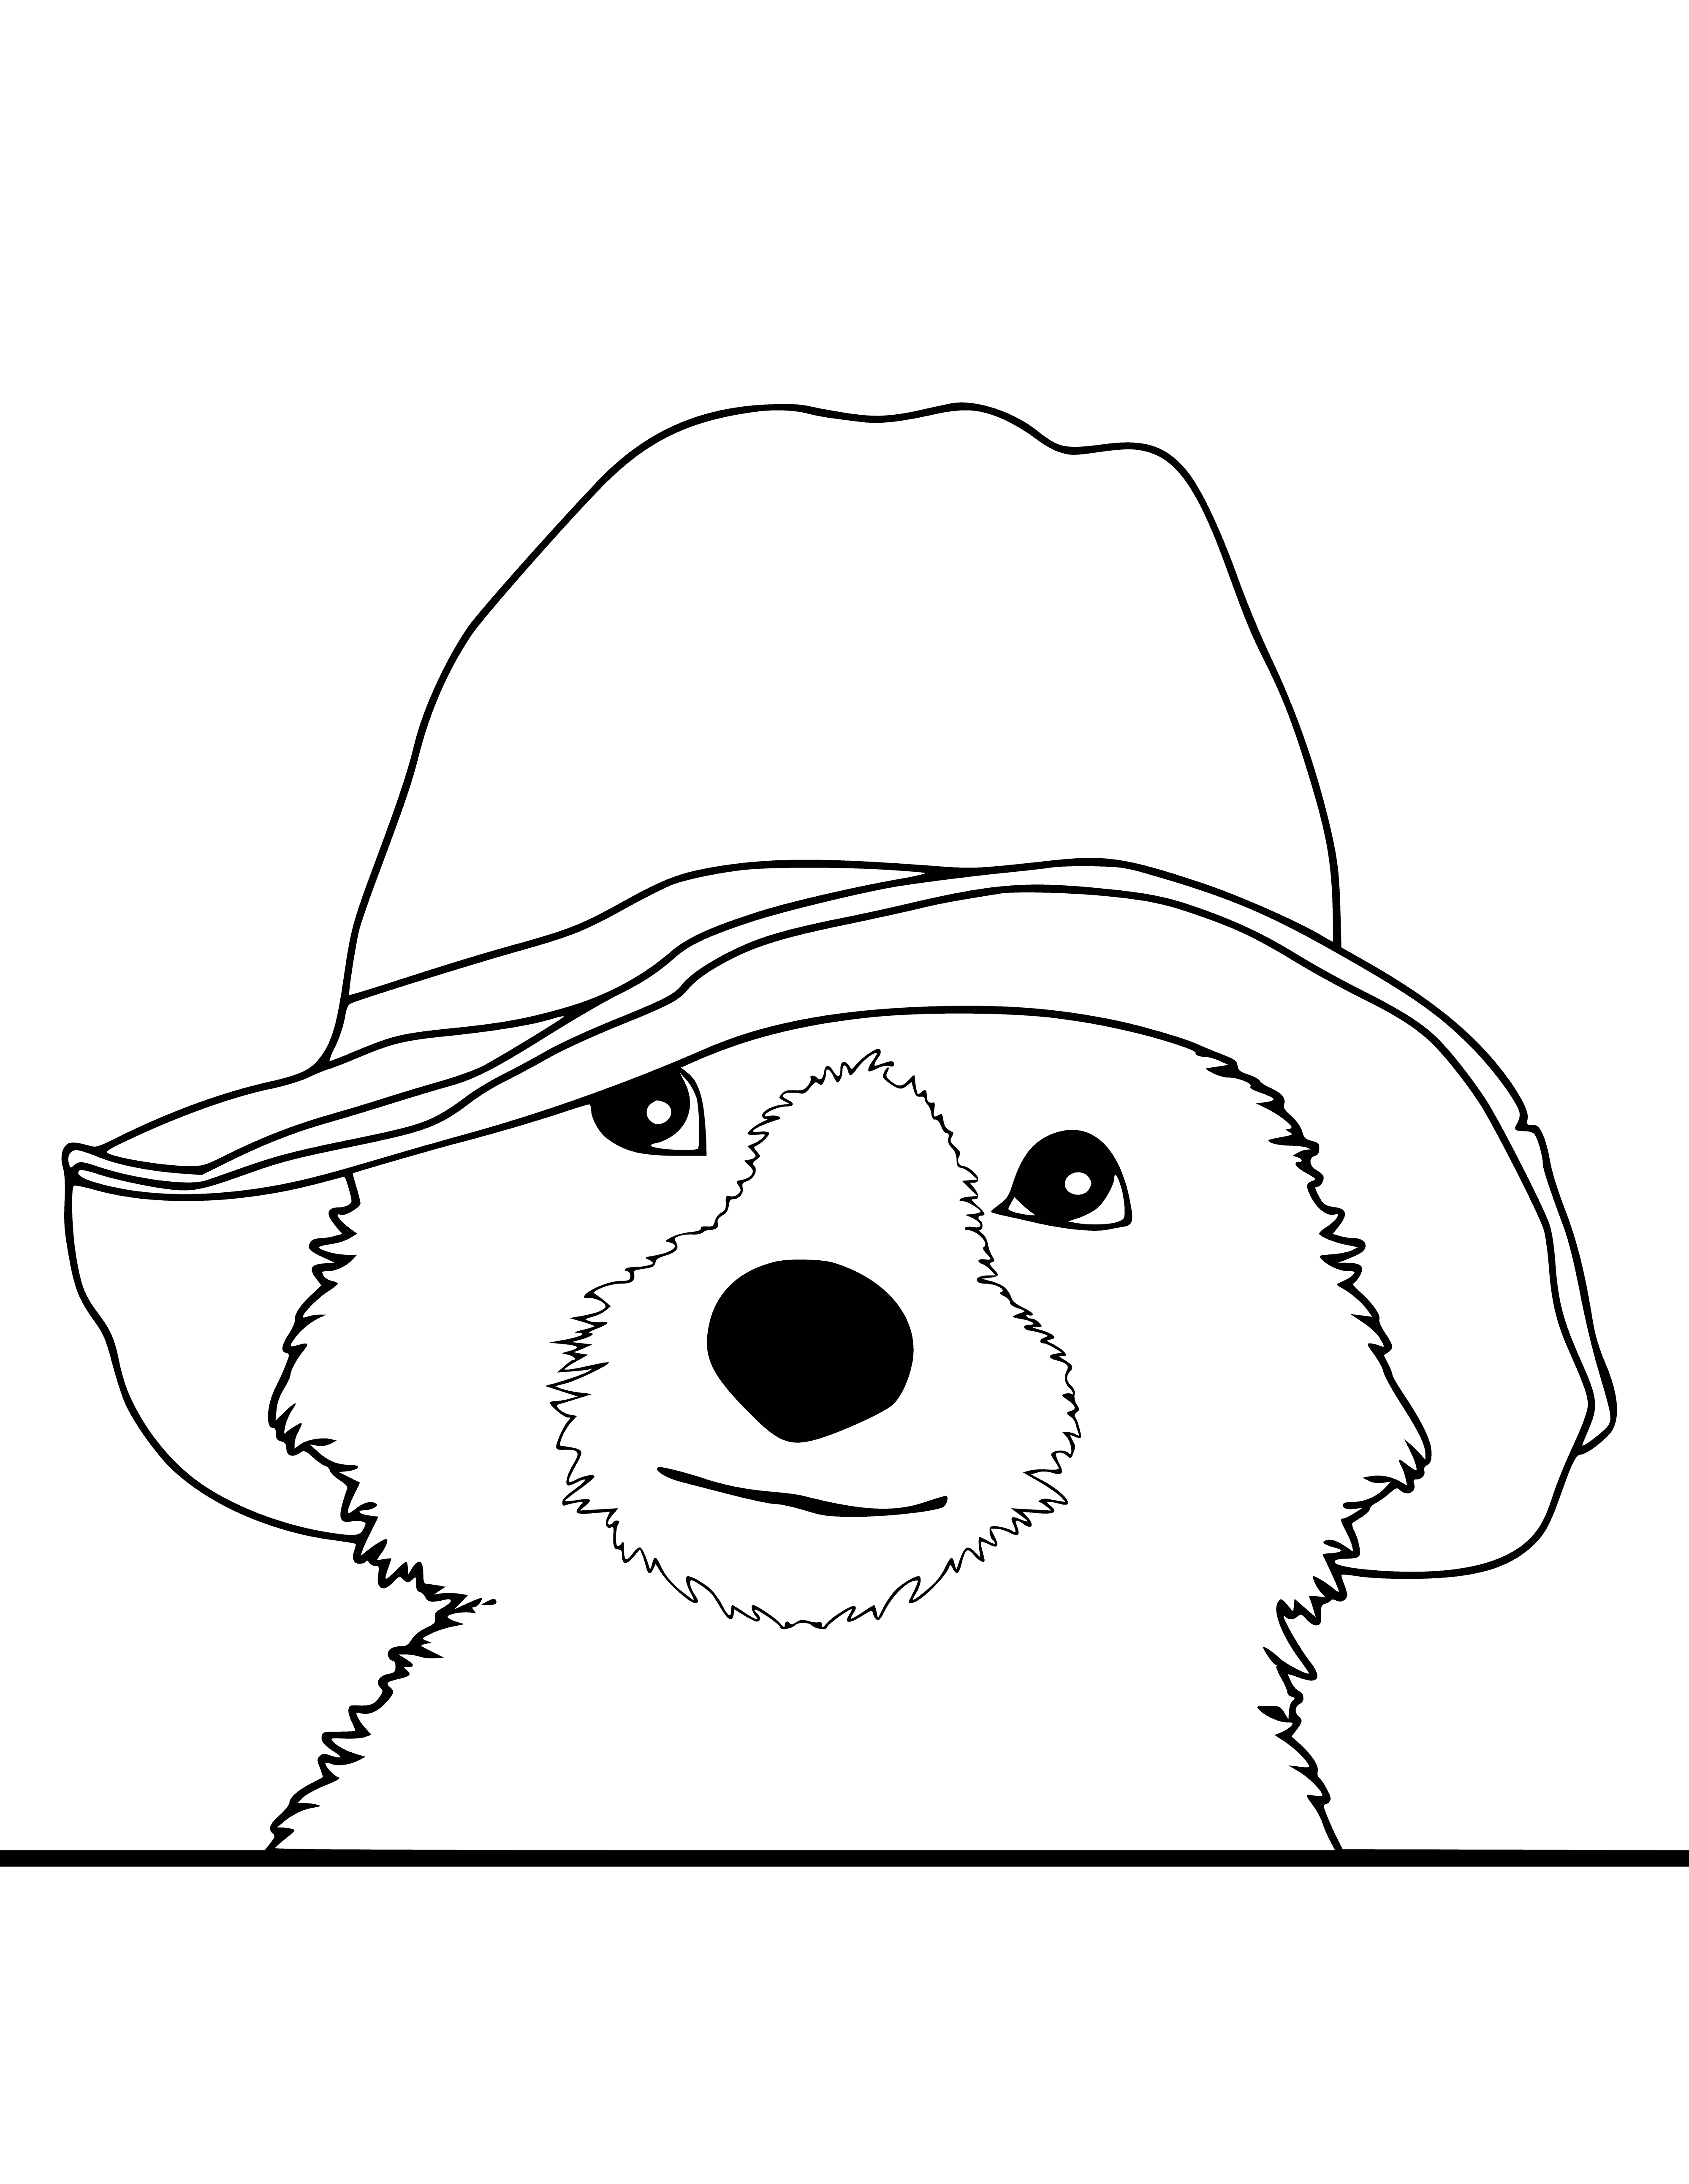 coloring page: Paddington Bear is a brown bear with white face, blue coat, and red hat. He carries a suitcase in his left hand.